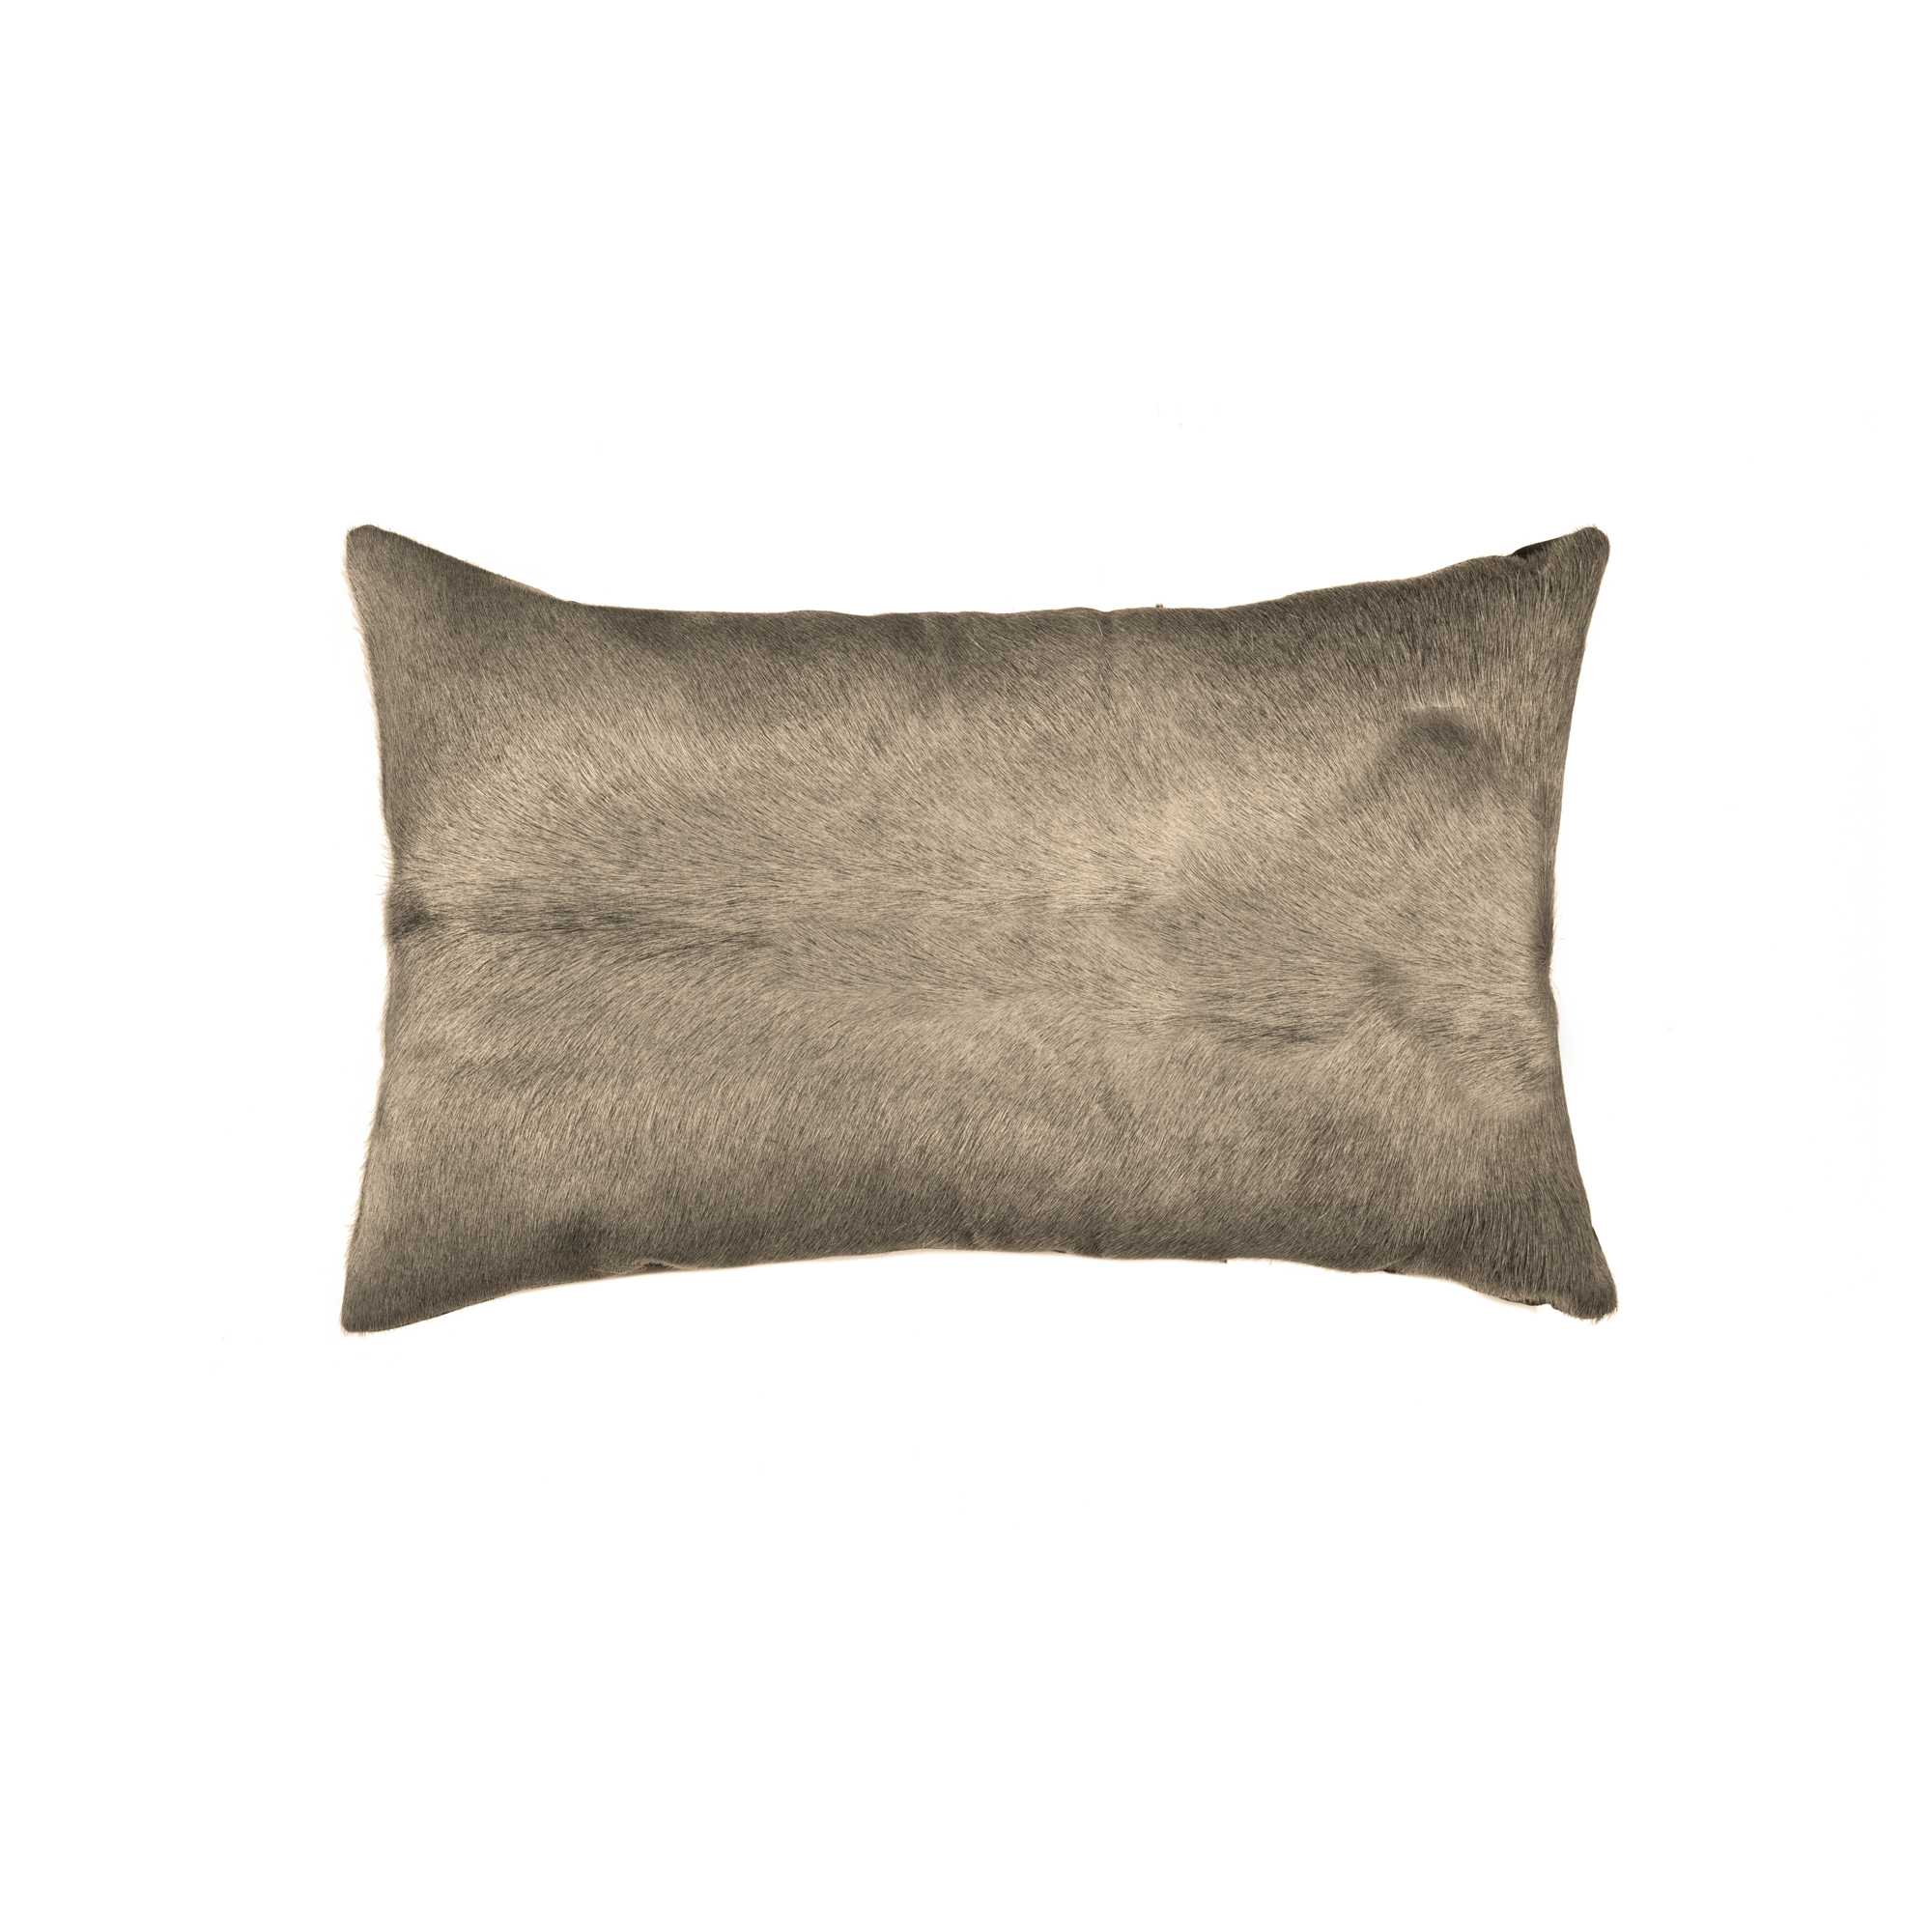 12" x 20" x 5" Taupe Cowhide - Pillow